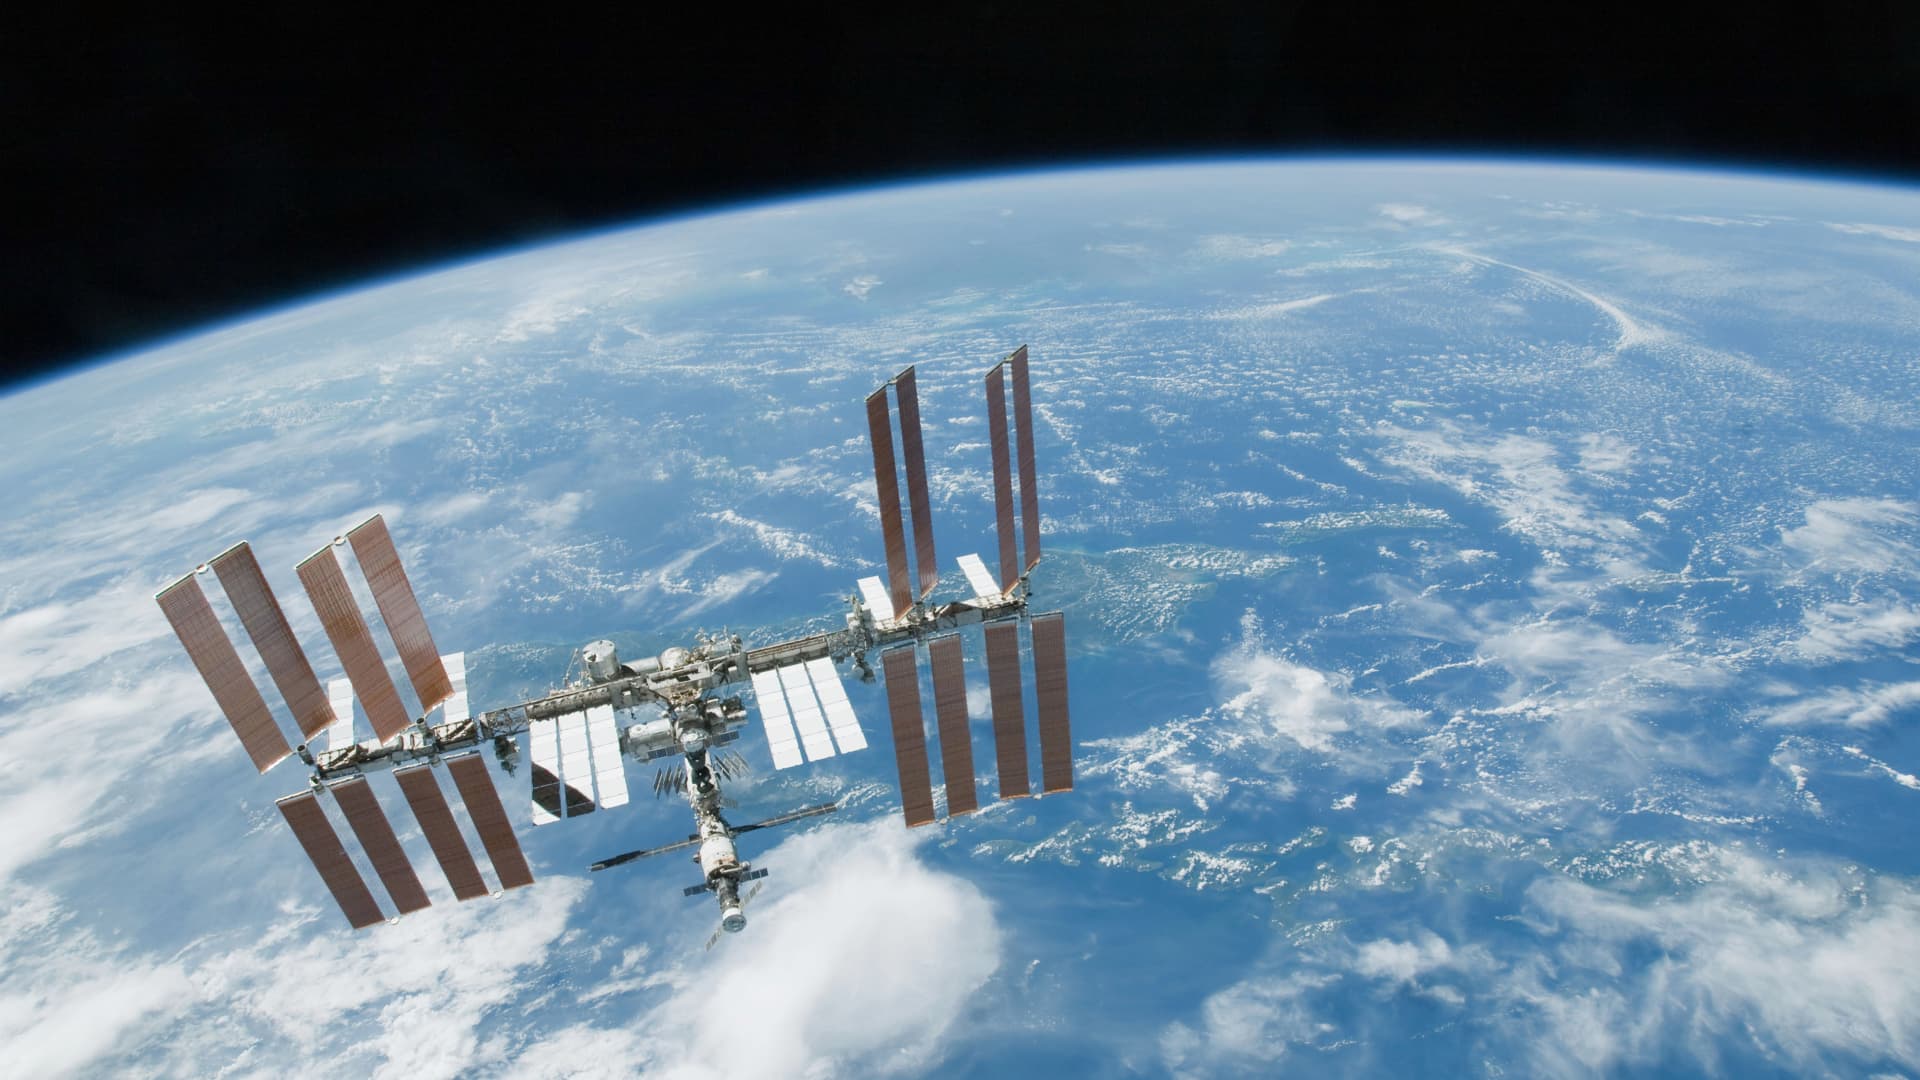 NASA is opening up the International Space Station for tourists with the first mission as early as 2020.